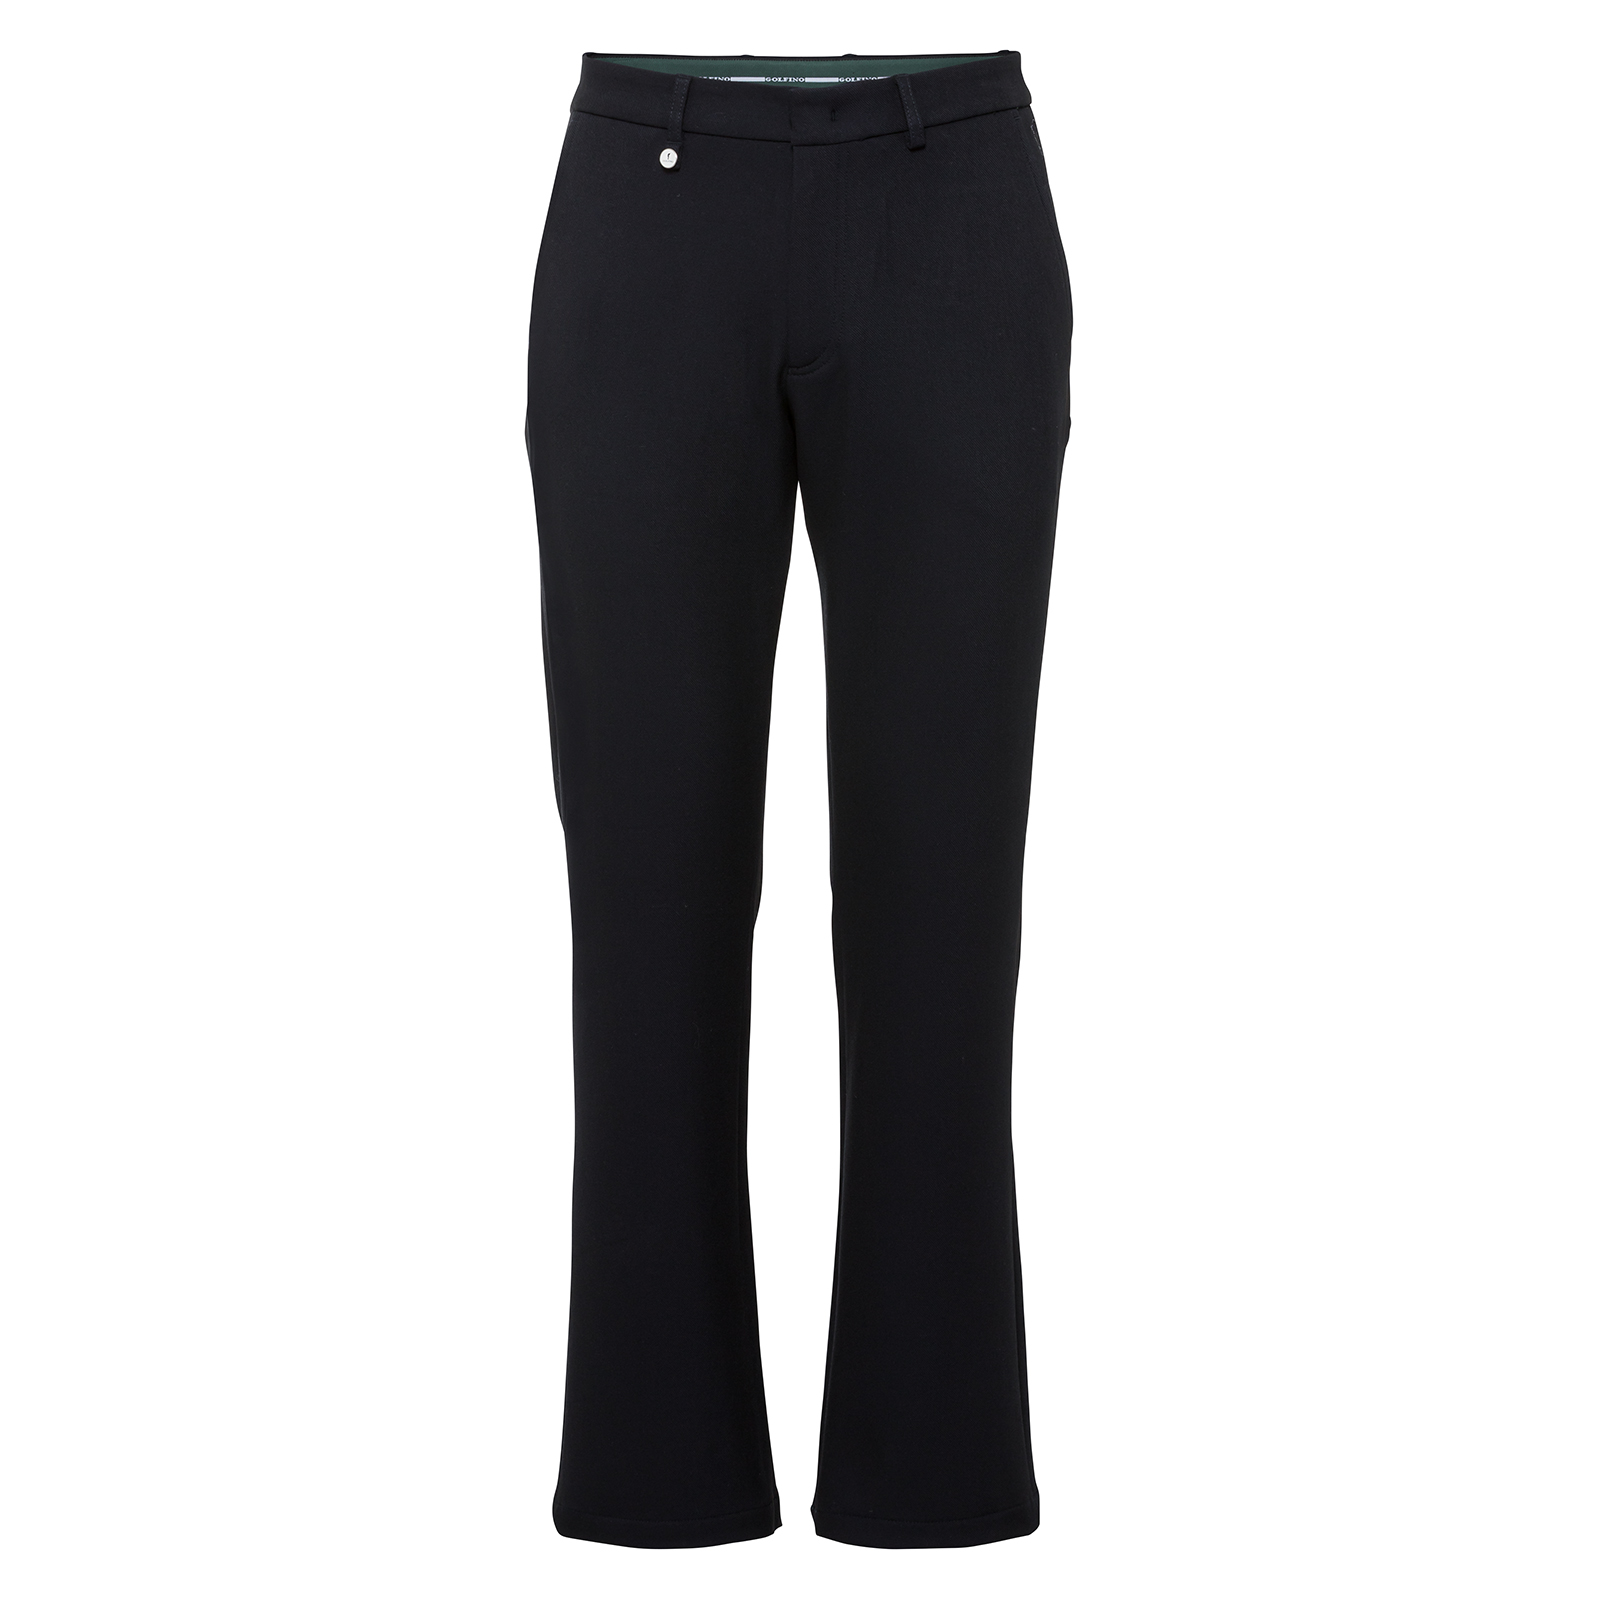 Comfortable and casual men's trousers